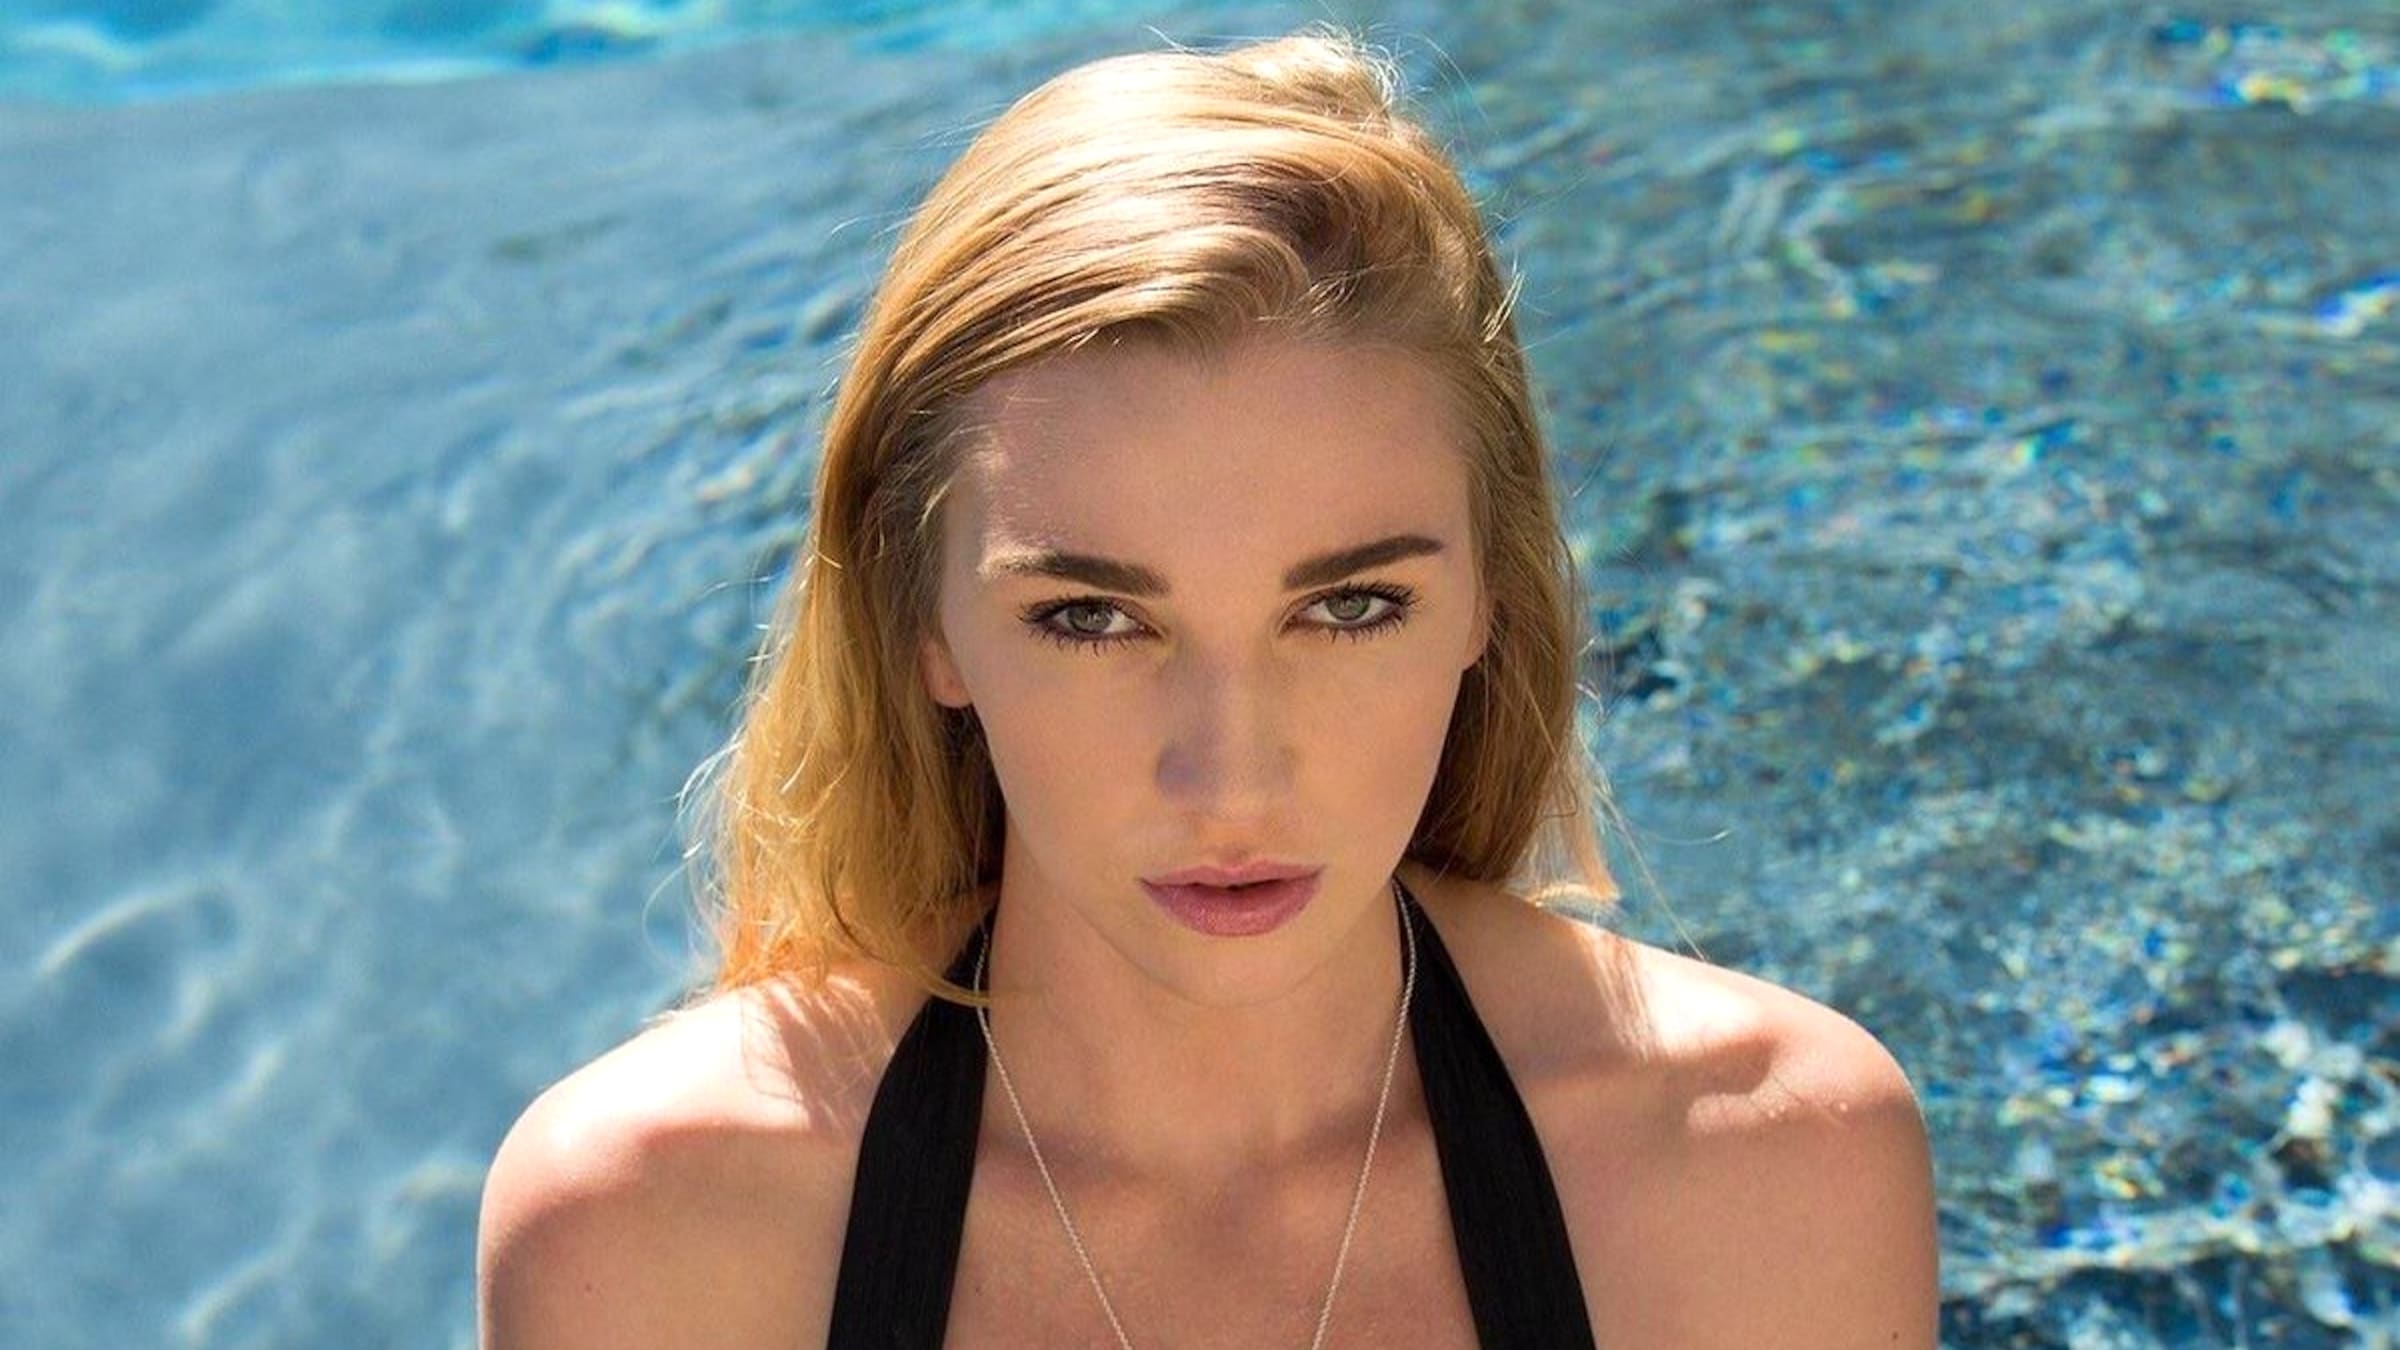 Recreational Porn - Porn Star Kendra Sunderland Booted Off Instagram After 'Joking' About Sex  With CEO Adam Mosseri